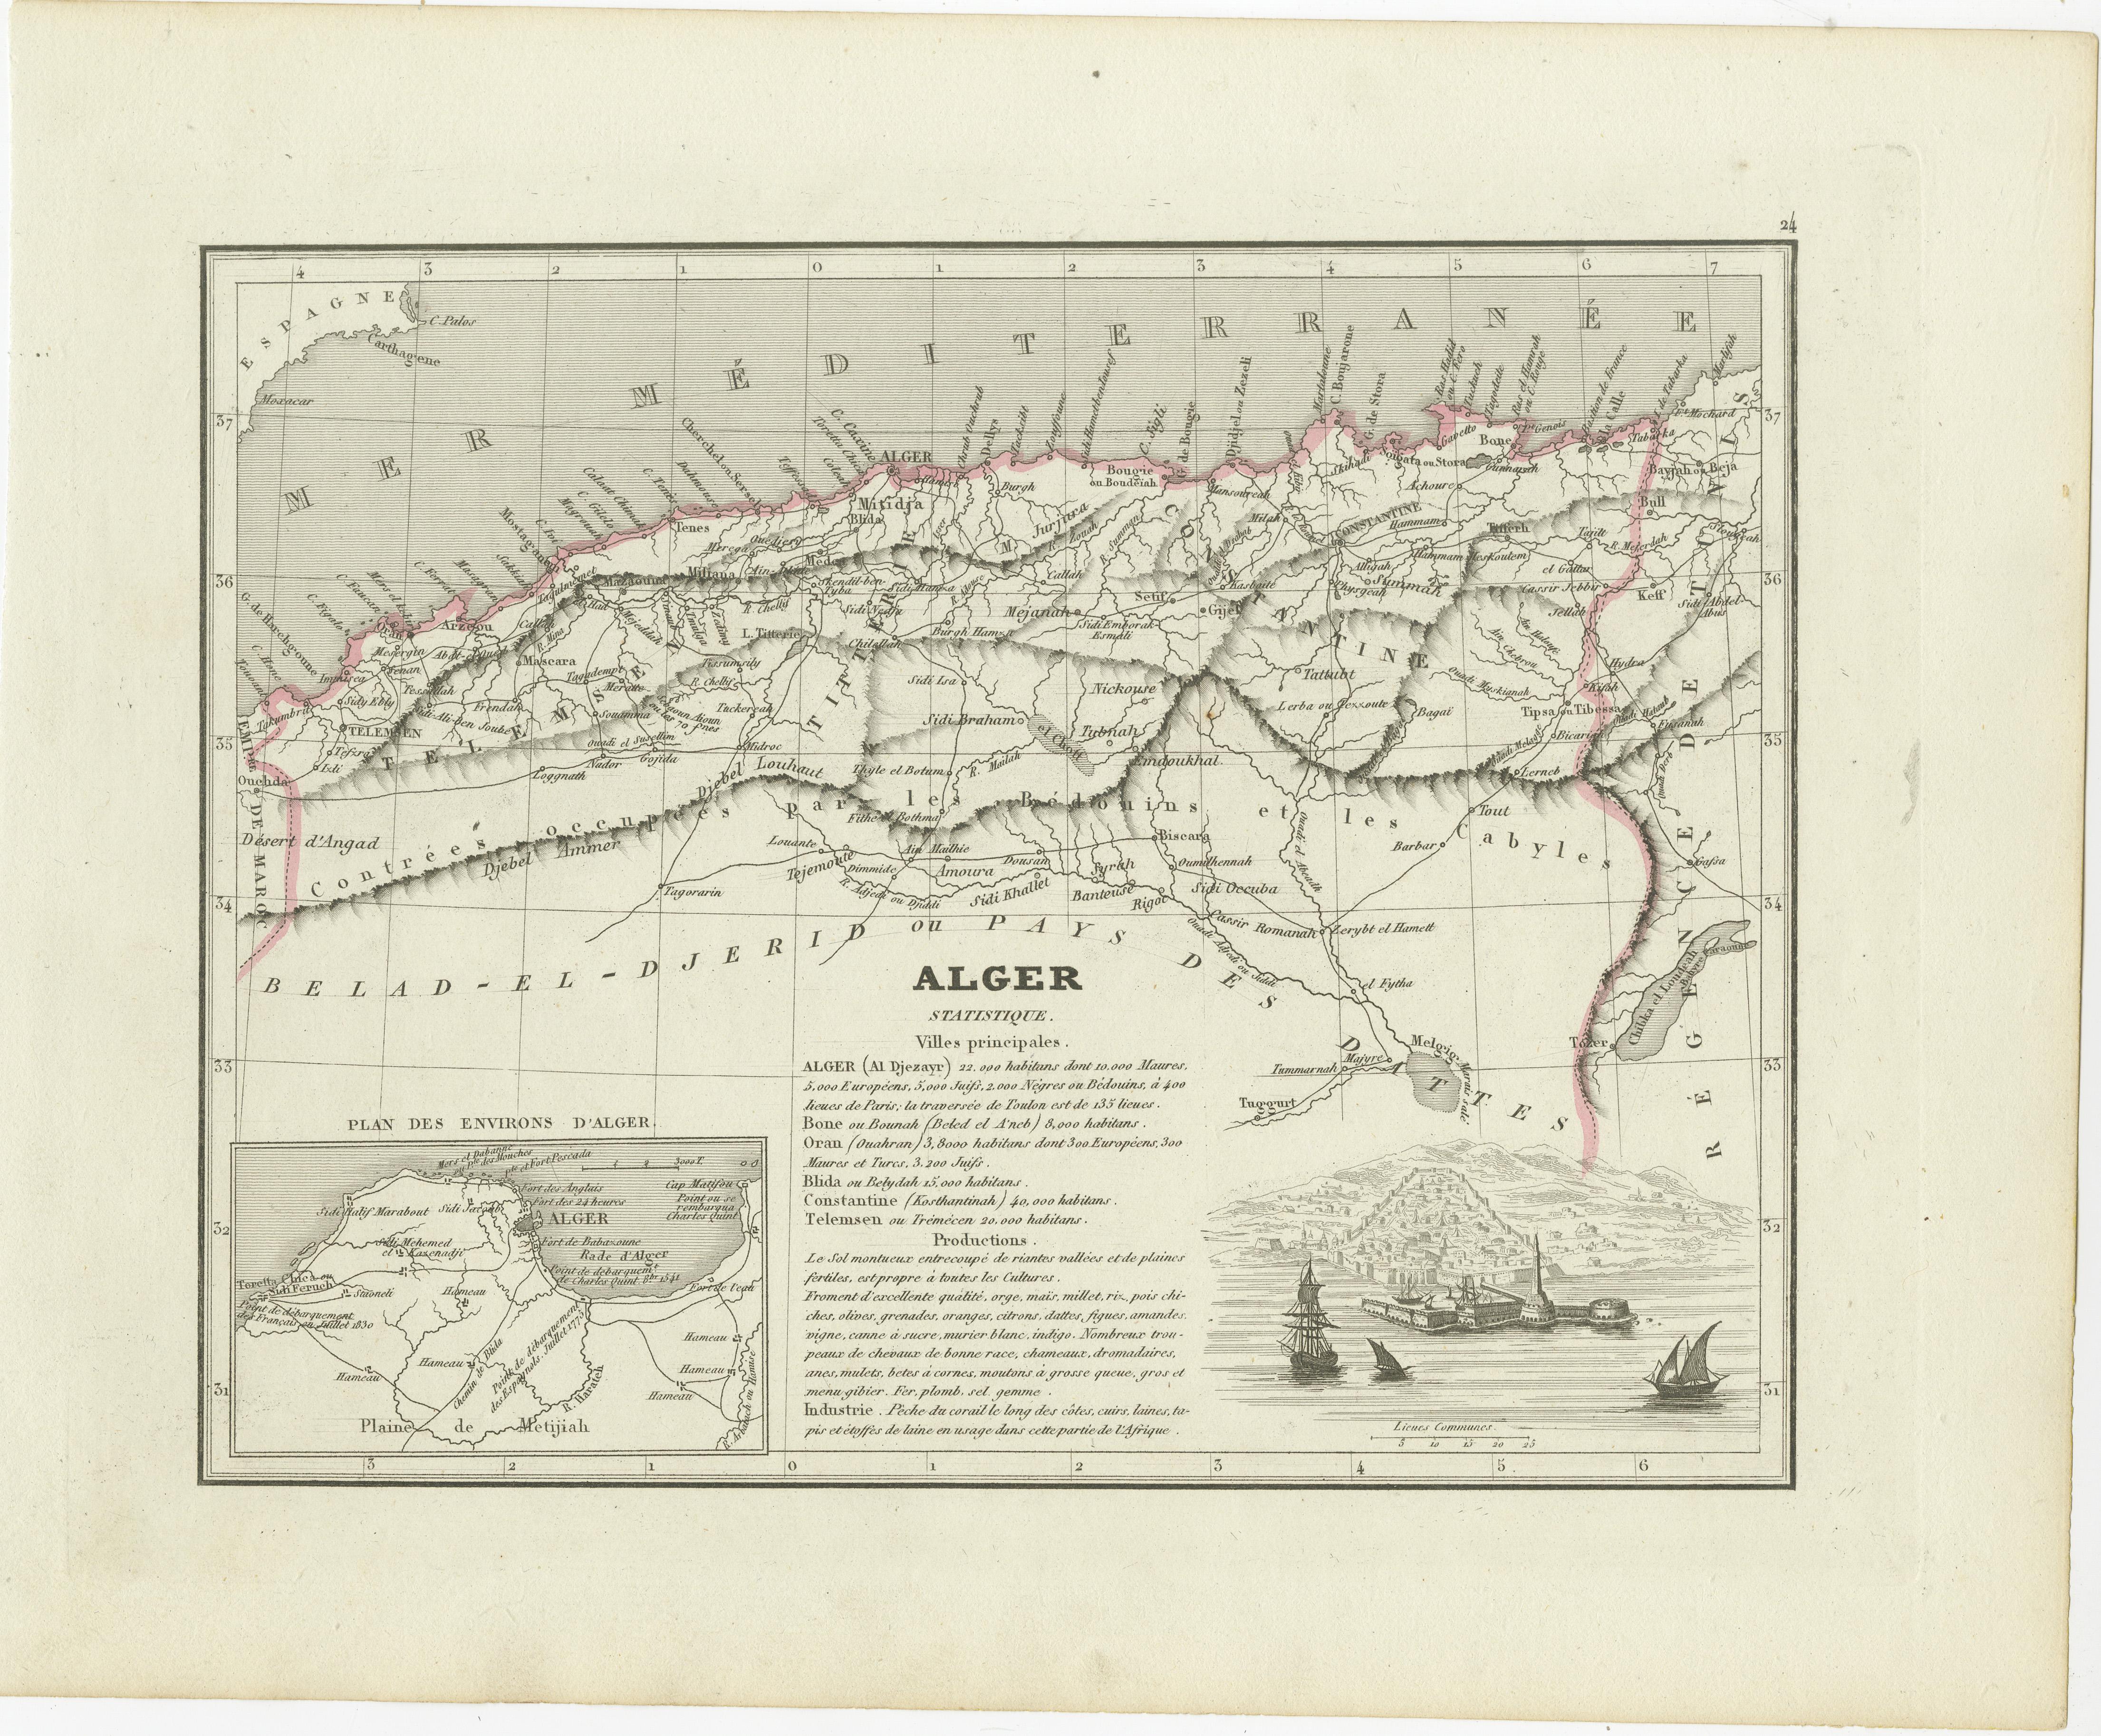 Antique map titled 'Alger'. This map shows the region of Algiers, Algeria. With a small inset map of the region of Algiers and a decorative vignette with a harbor view. Originates from 'Dictionnaire Universel de Geographie (.)'. Published by Binet,